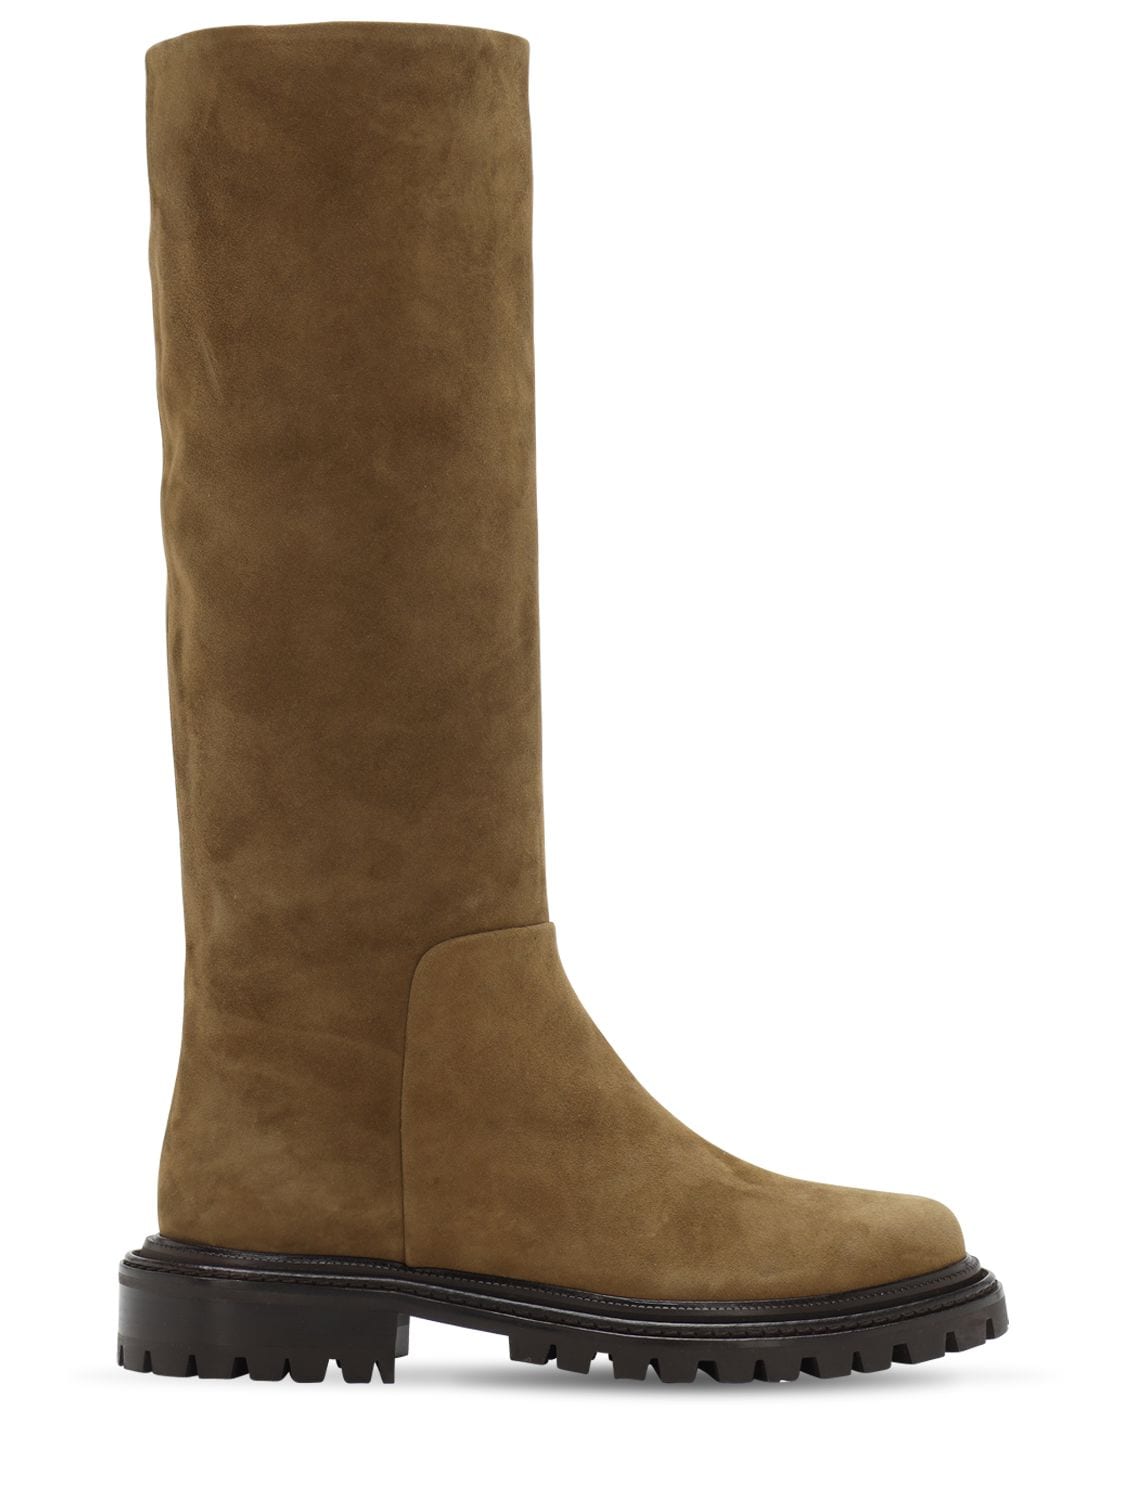 30mm Sky Suede Tall Boots